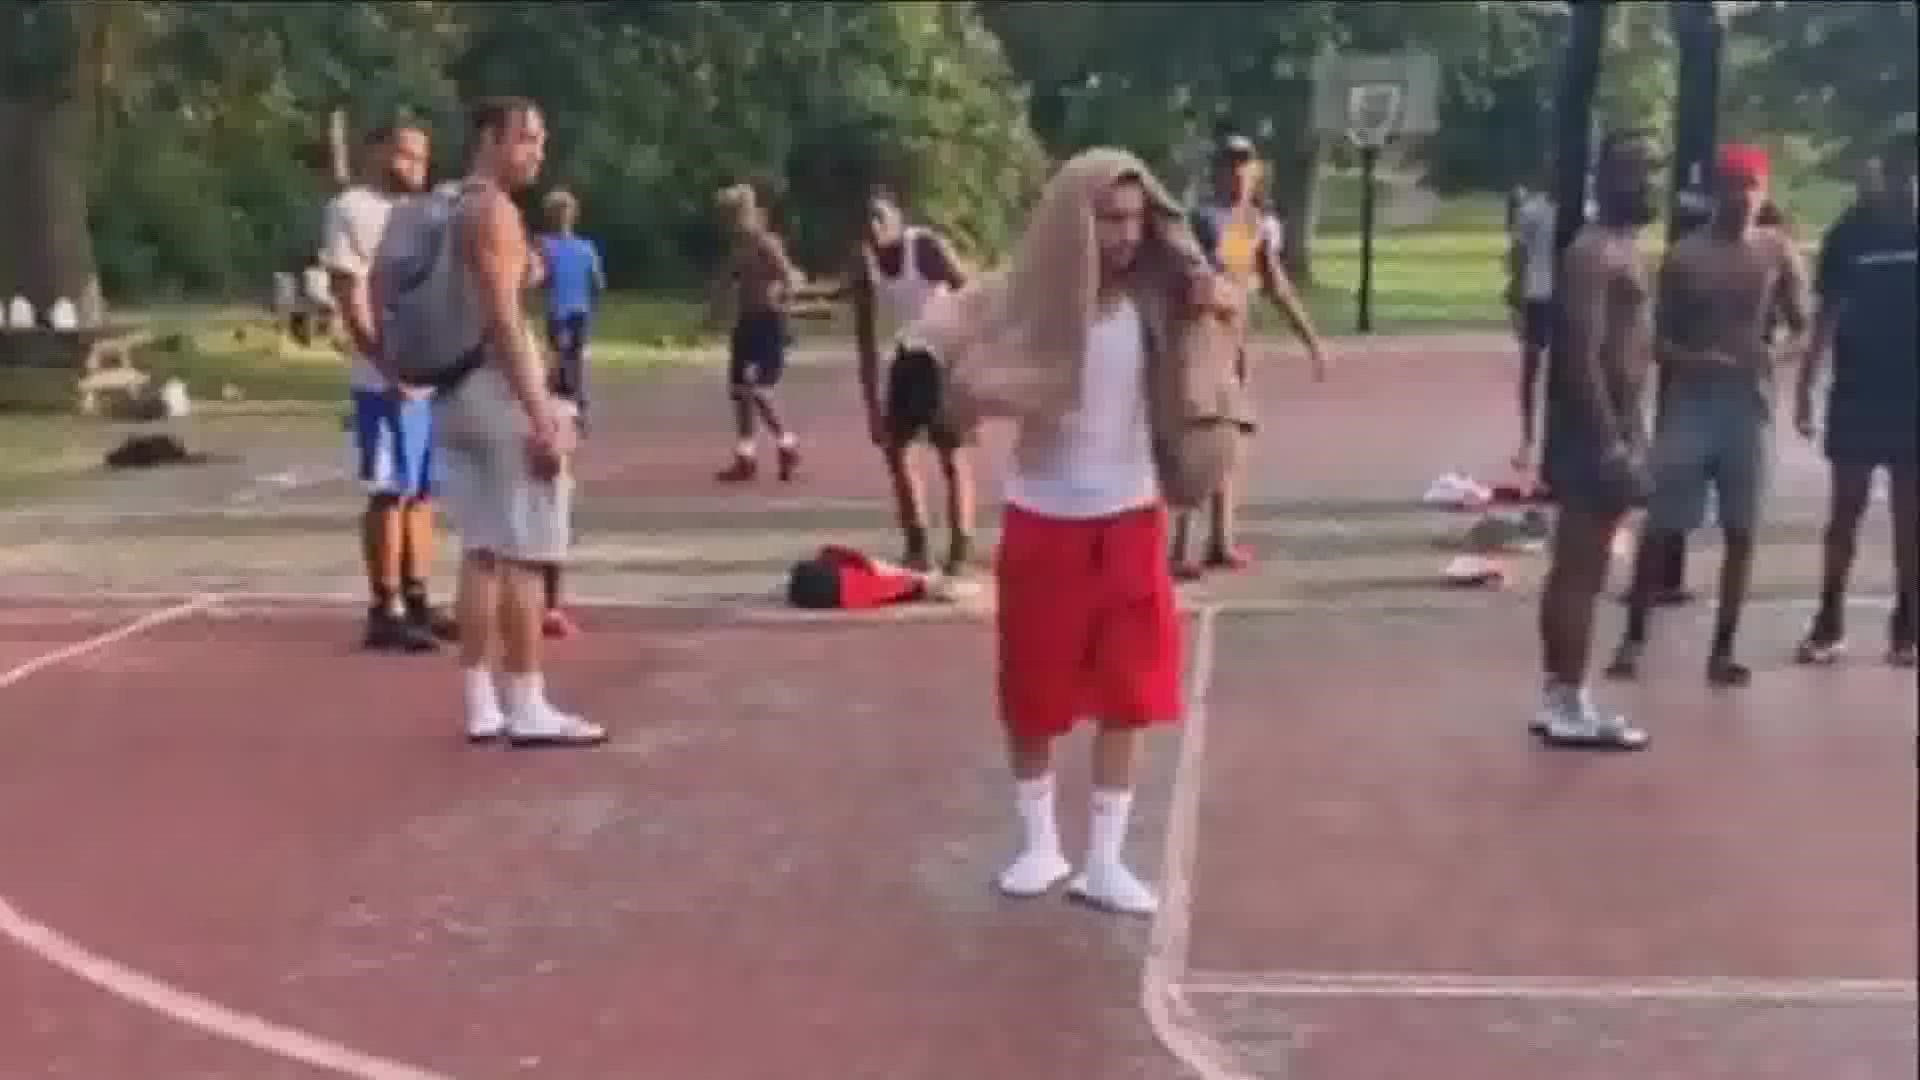 The day before his death there was a fight at the park and Joel was there. He's in the red shorts in these screen shots from the video of the fight.